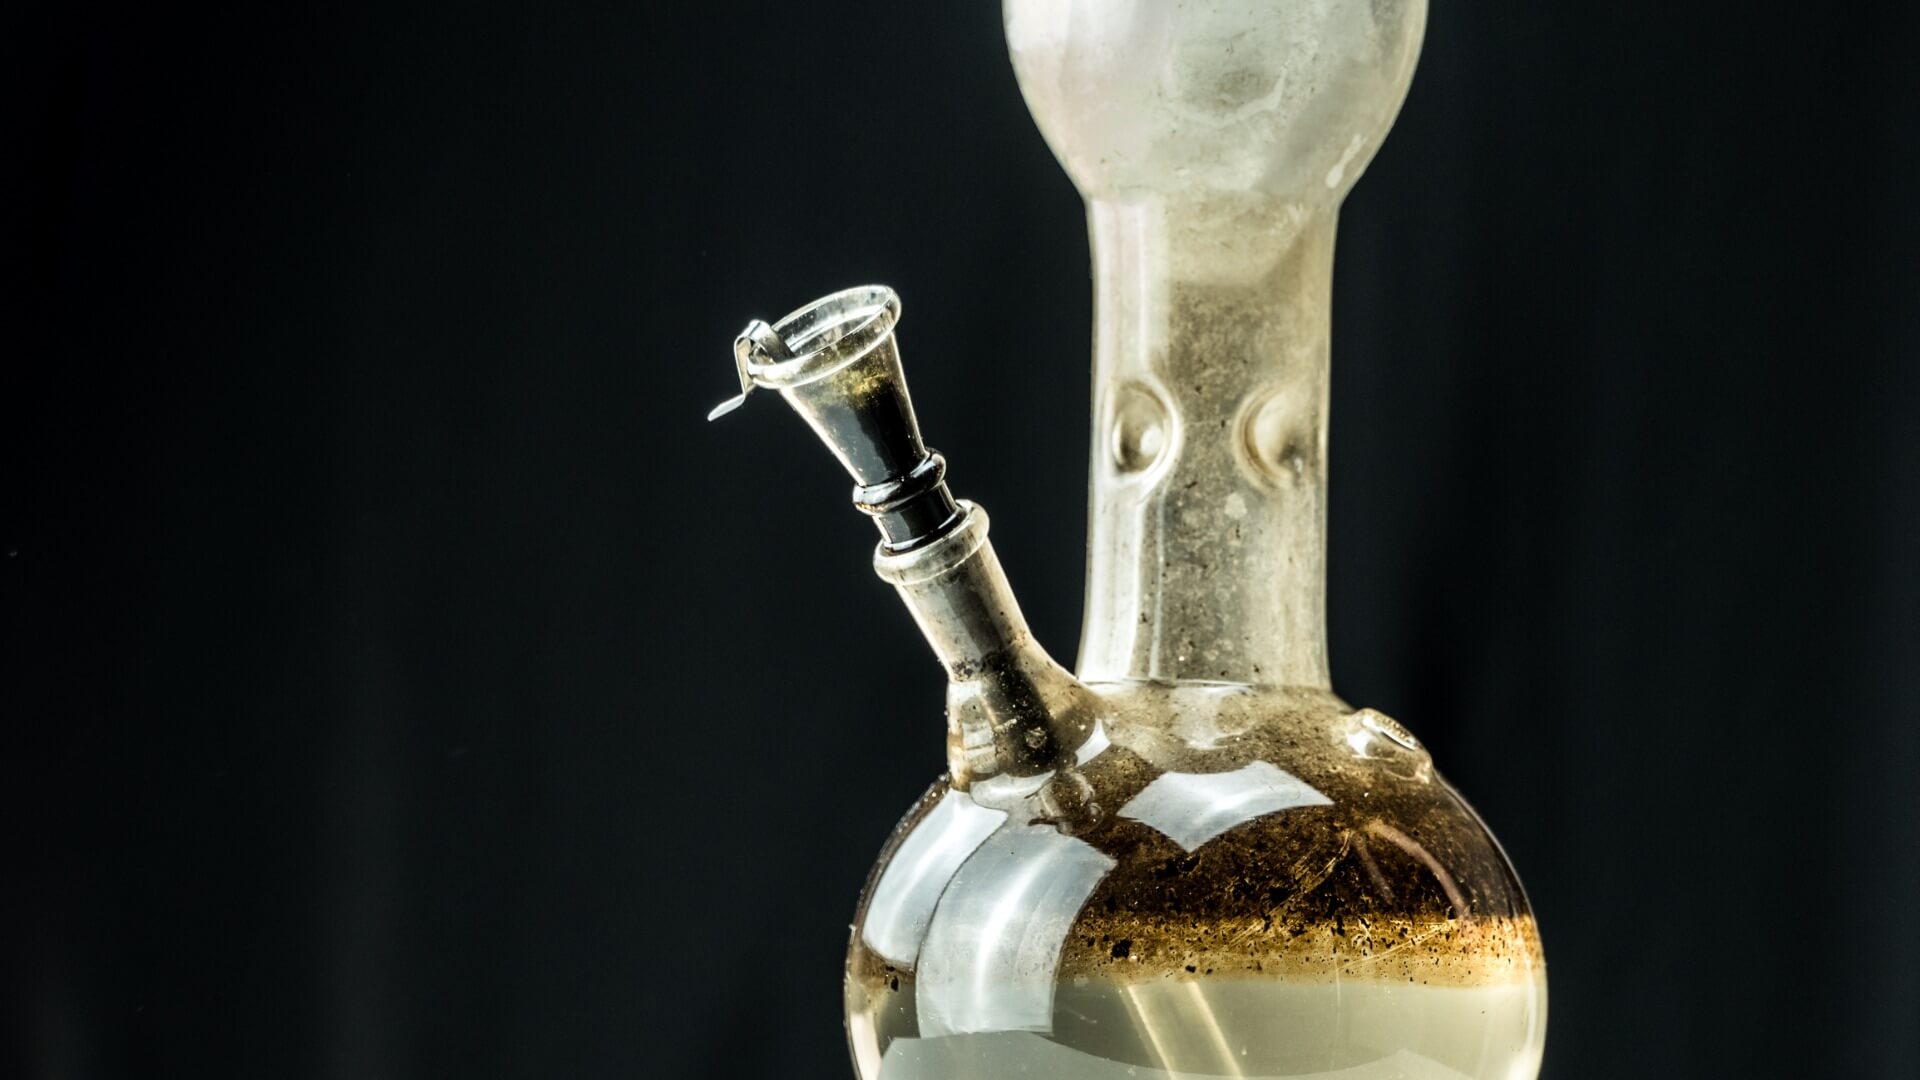 DAB OIL RIG – THE NEXT WAVE OF SMOKING TECHNOLOGY